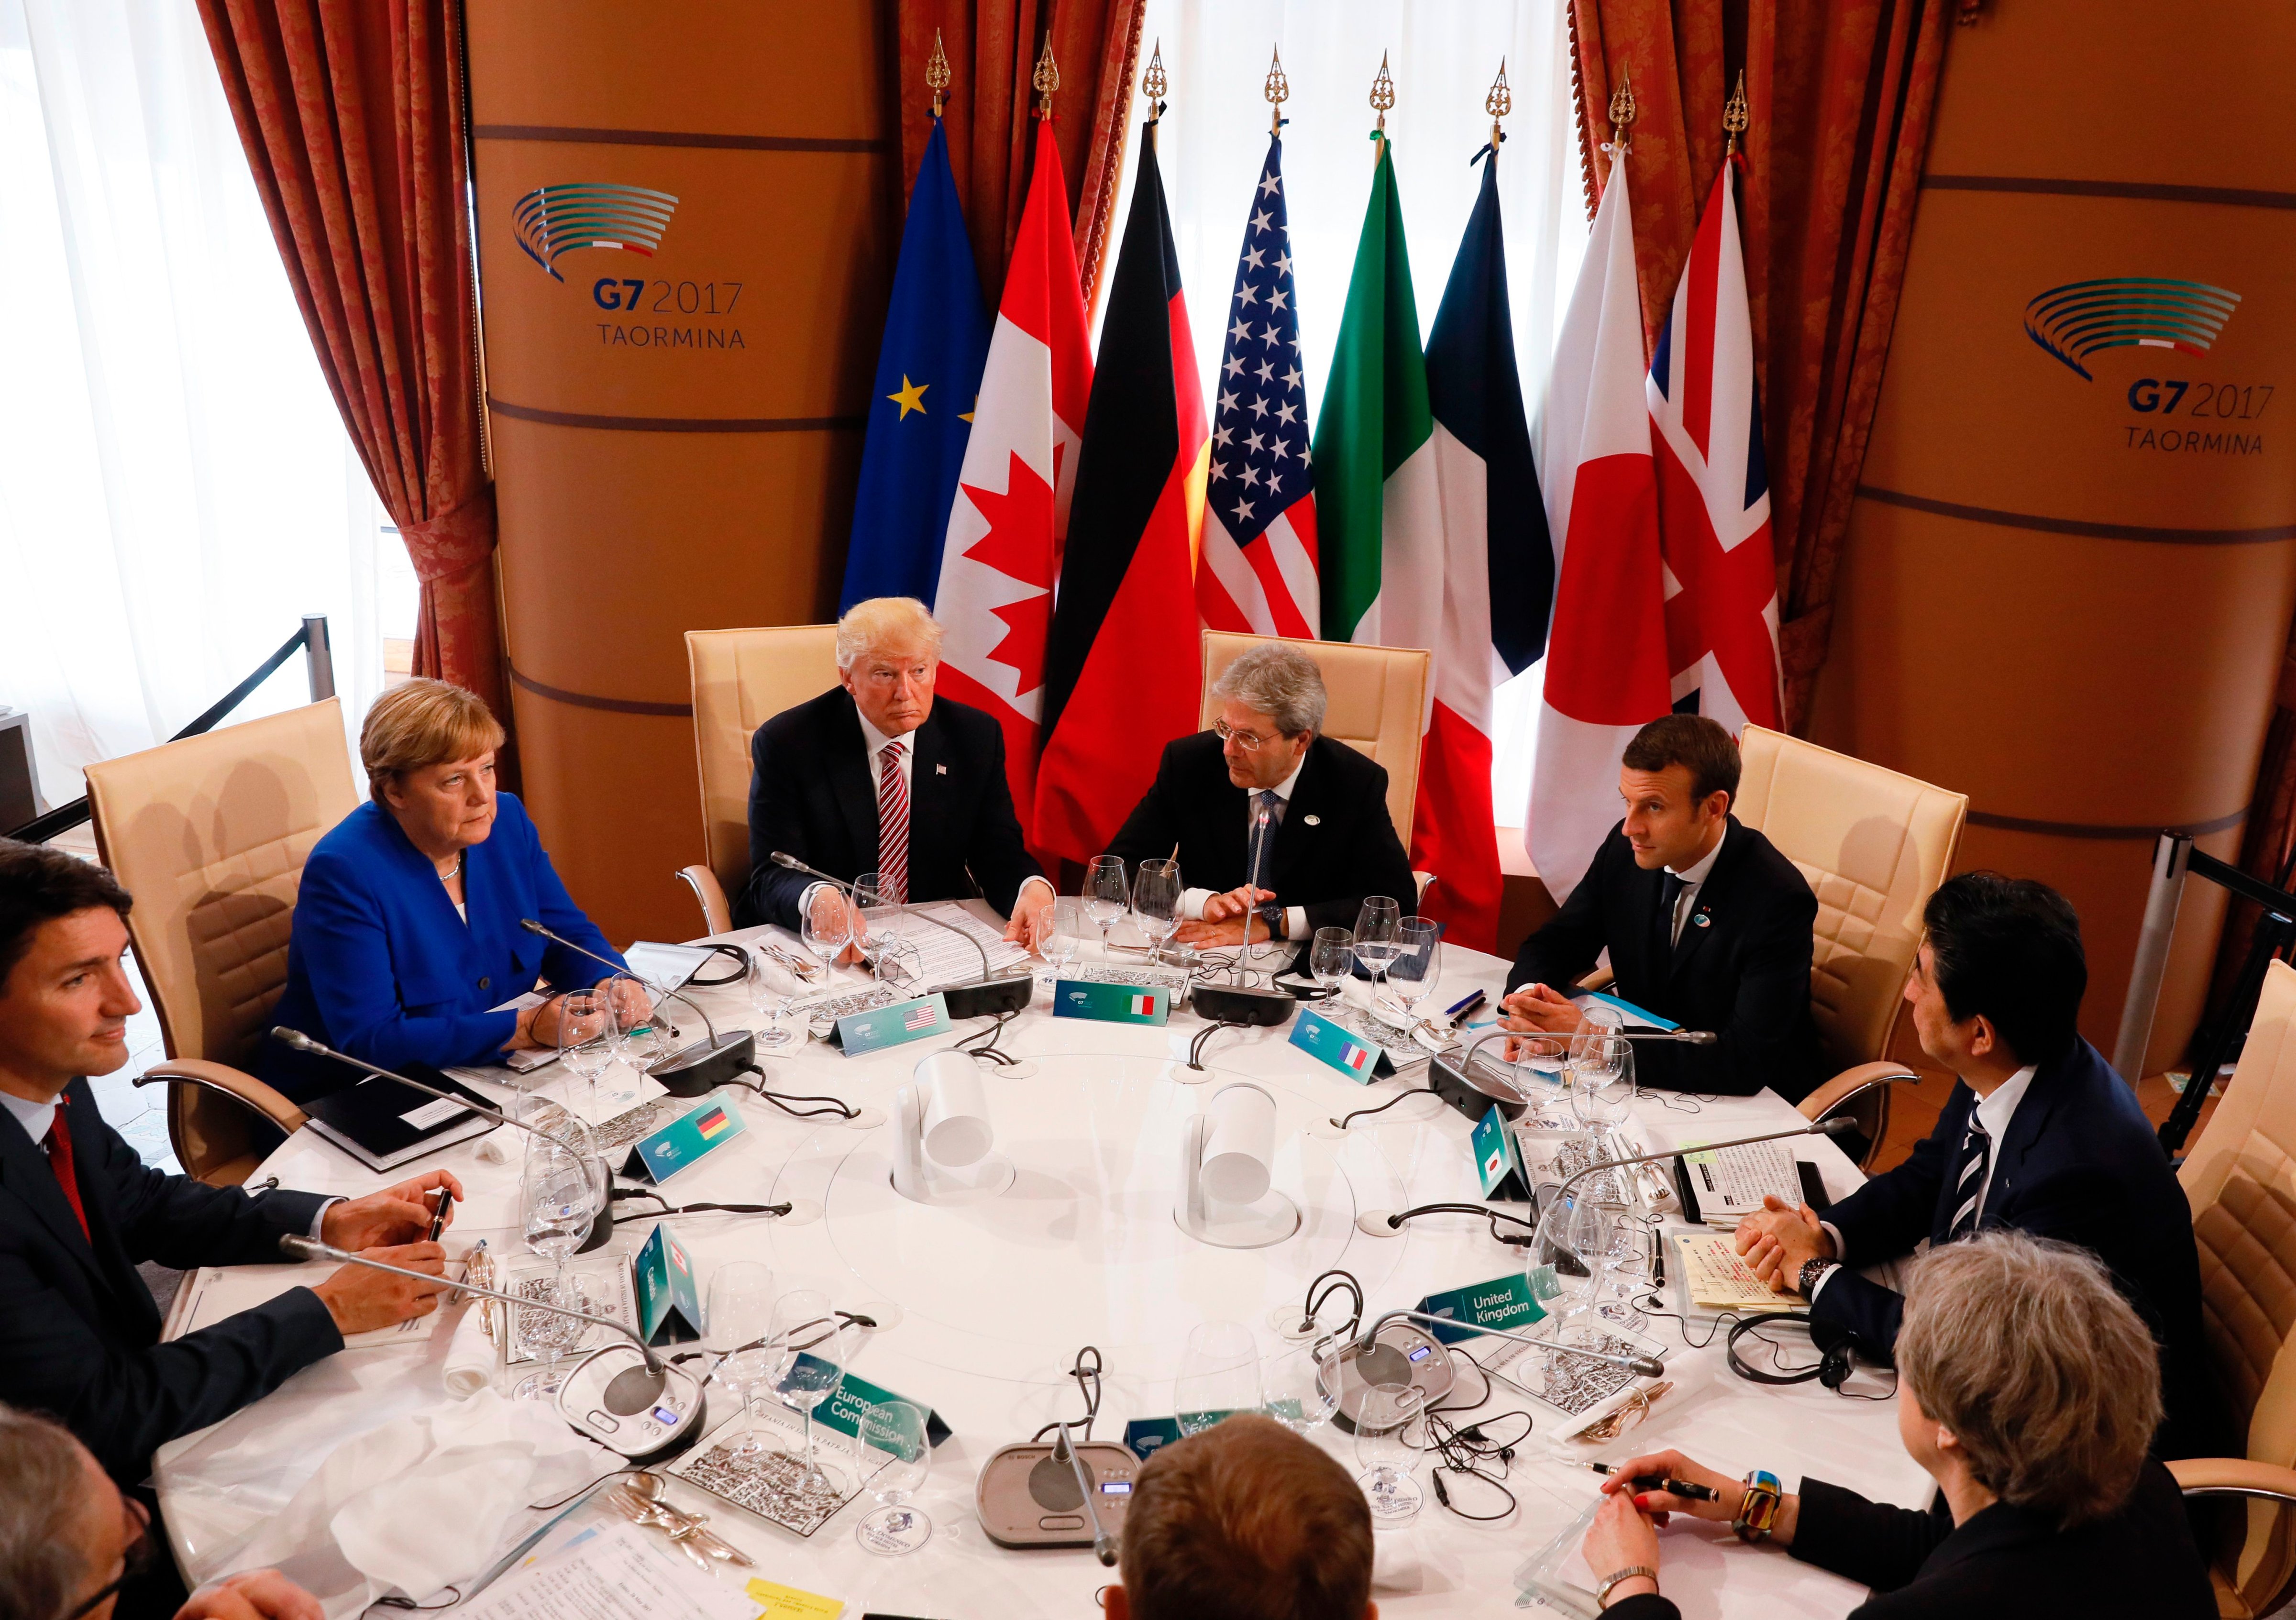 From left: Canadian Prime Minister Justin Trudeau, German Chancellor Angela Merkel, U.S. President Donald Trump, Italian Prime Minister Paolo Gentiloni, French President Emmanuel Macron, Japanese Prime Minister Shinzo Abe, Britains Prime Minister Theresa May, European Council President Donald Tusk and European Commission President Jean-Claude Juncker sit around a table during the G7 Summit of the Heads of State and of Government in Taormina, Sicily, on May 26, 2017. (Jonathan Ernst&mdash;AFP/Getty Images)